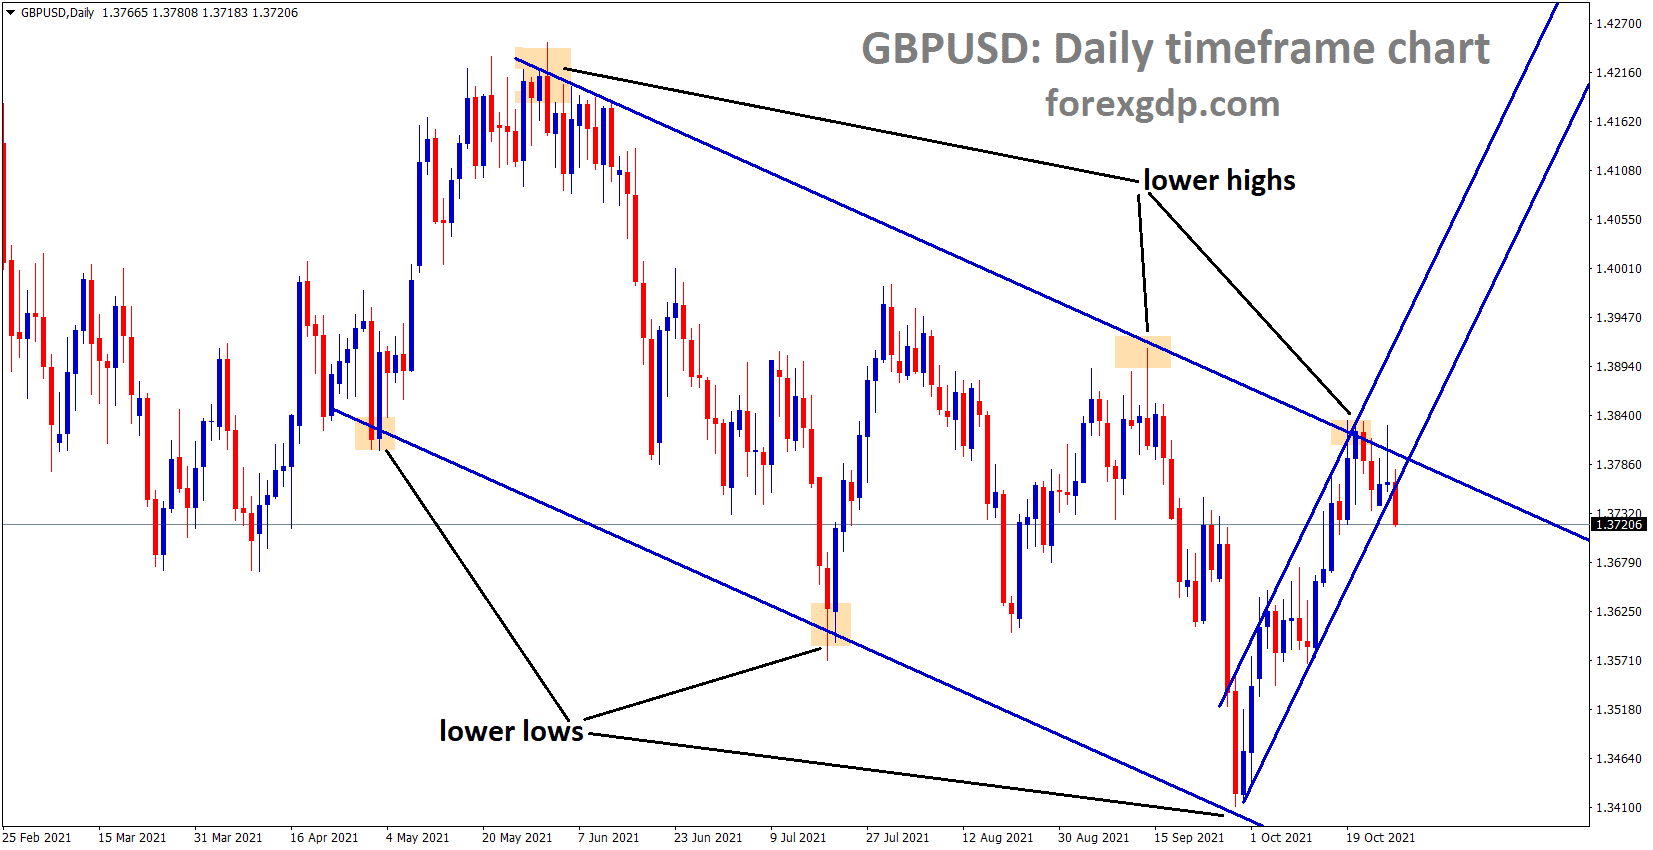 GBPUSD is moving in a Descending channel